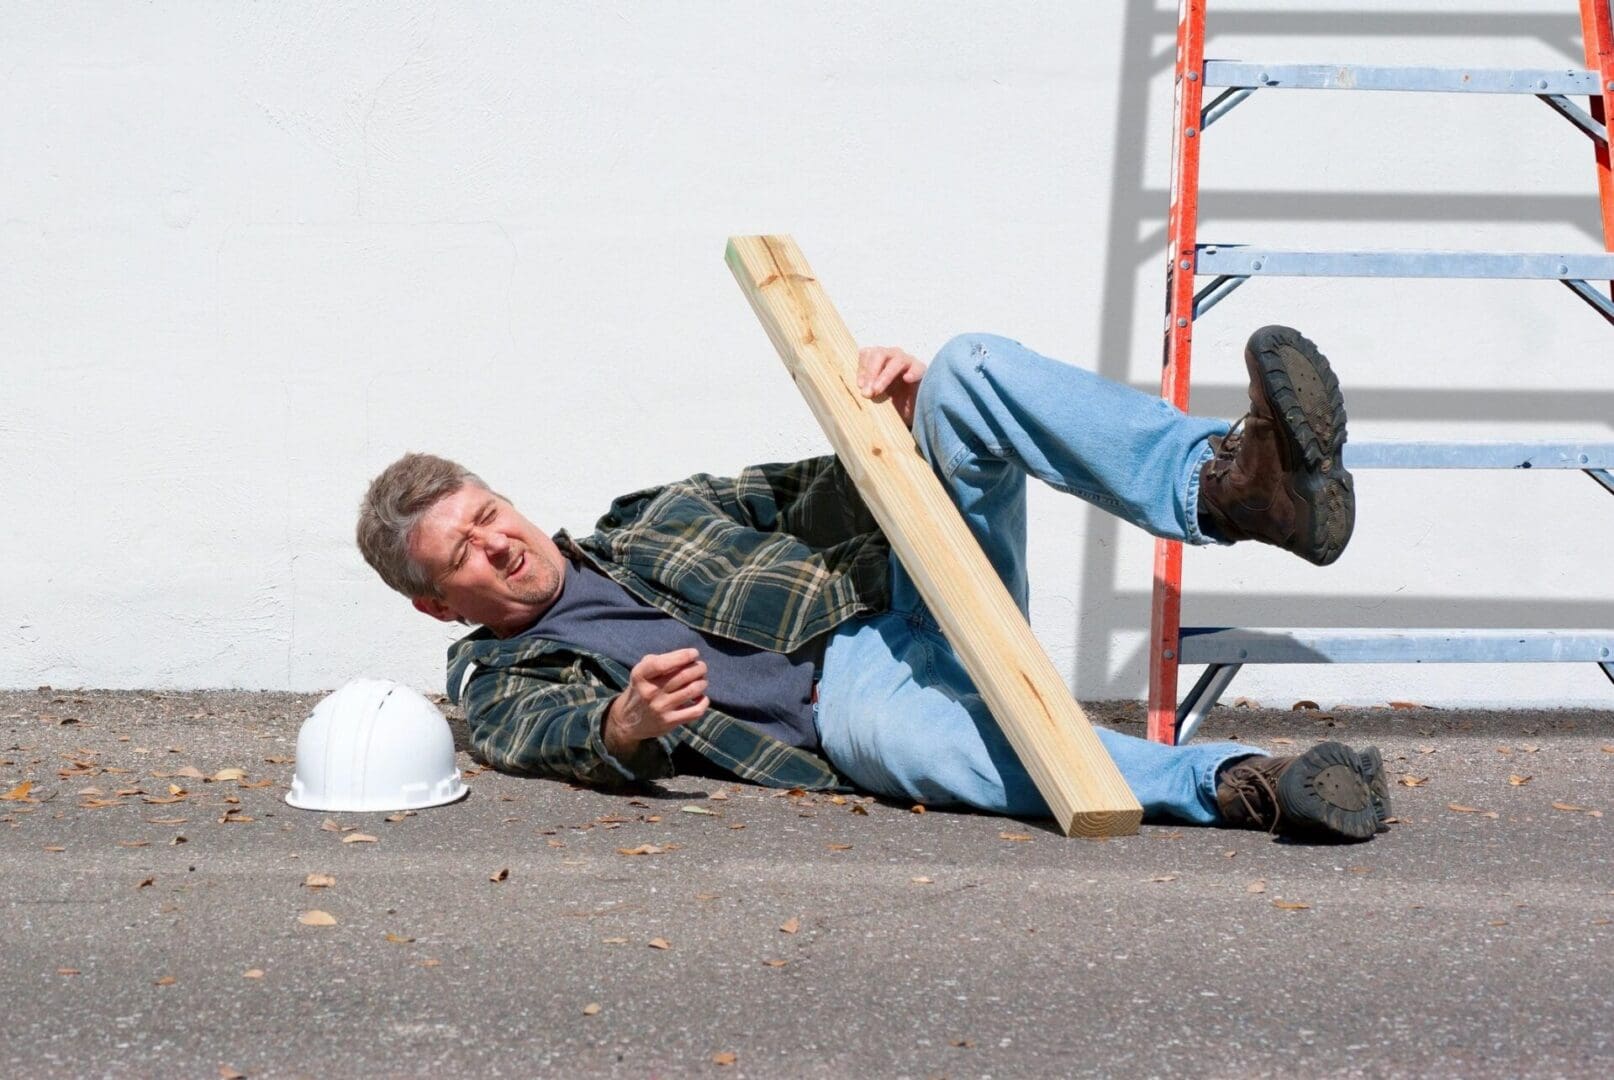 A man laying on the ground holding a wooden plank.